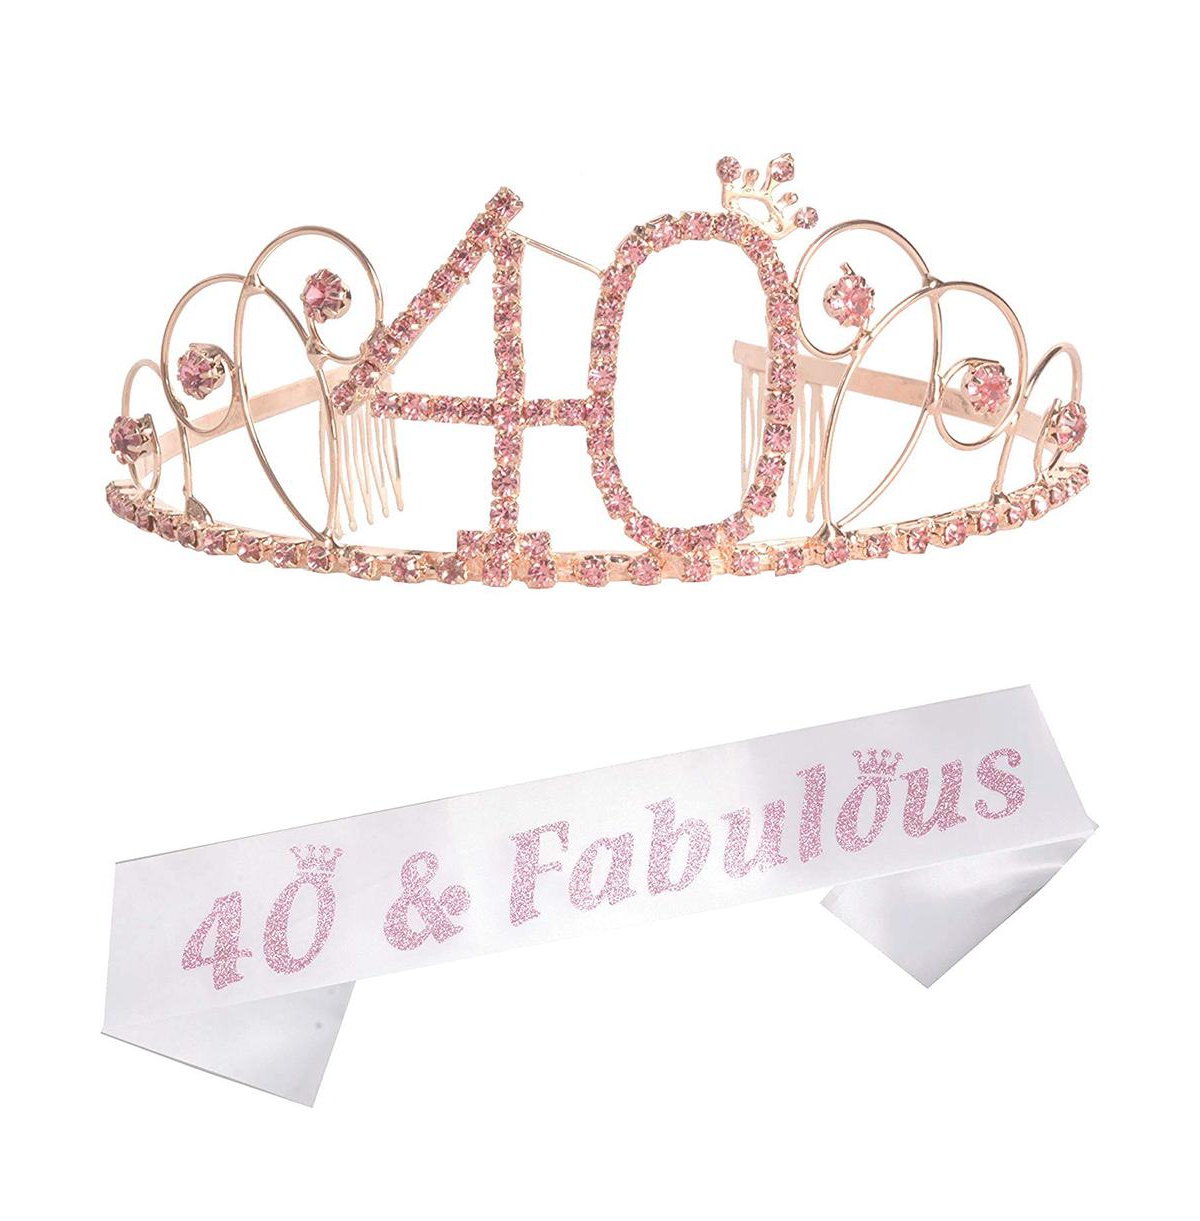 40th Birthday Sash and Tiara Set for Women - Glittery Sash and Pink Rhinestone Metal Tiara, Perfect 40th Birthday Party Gifts and Accessories - Pink